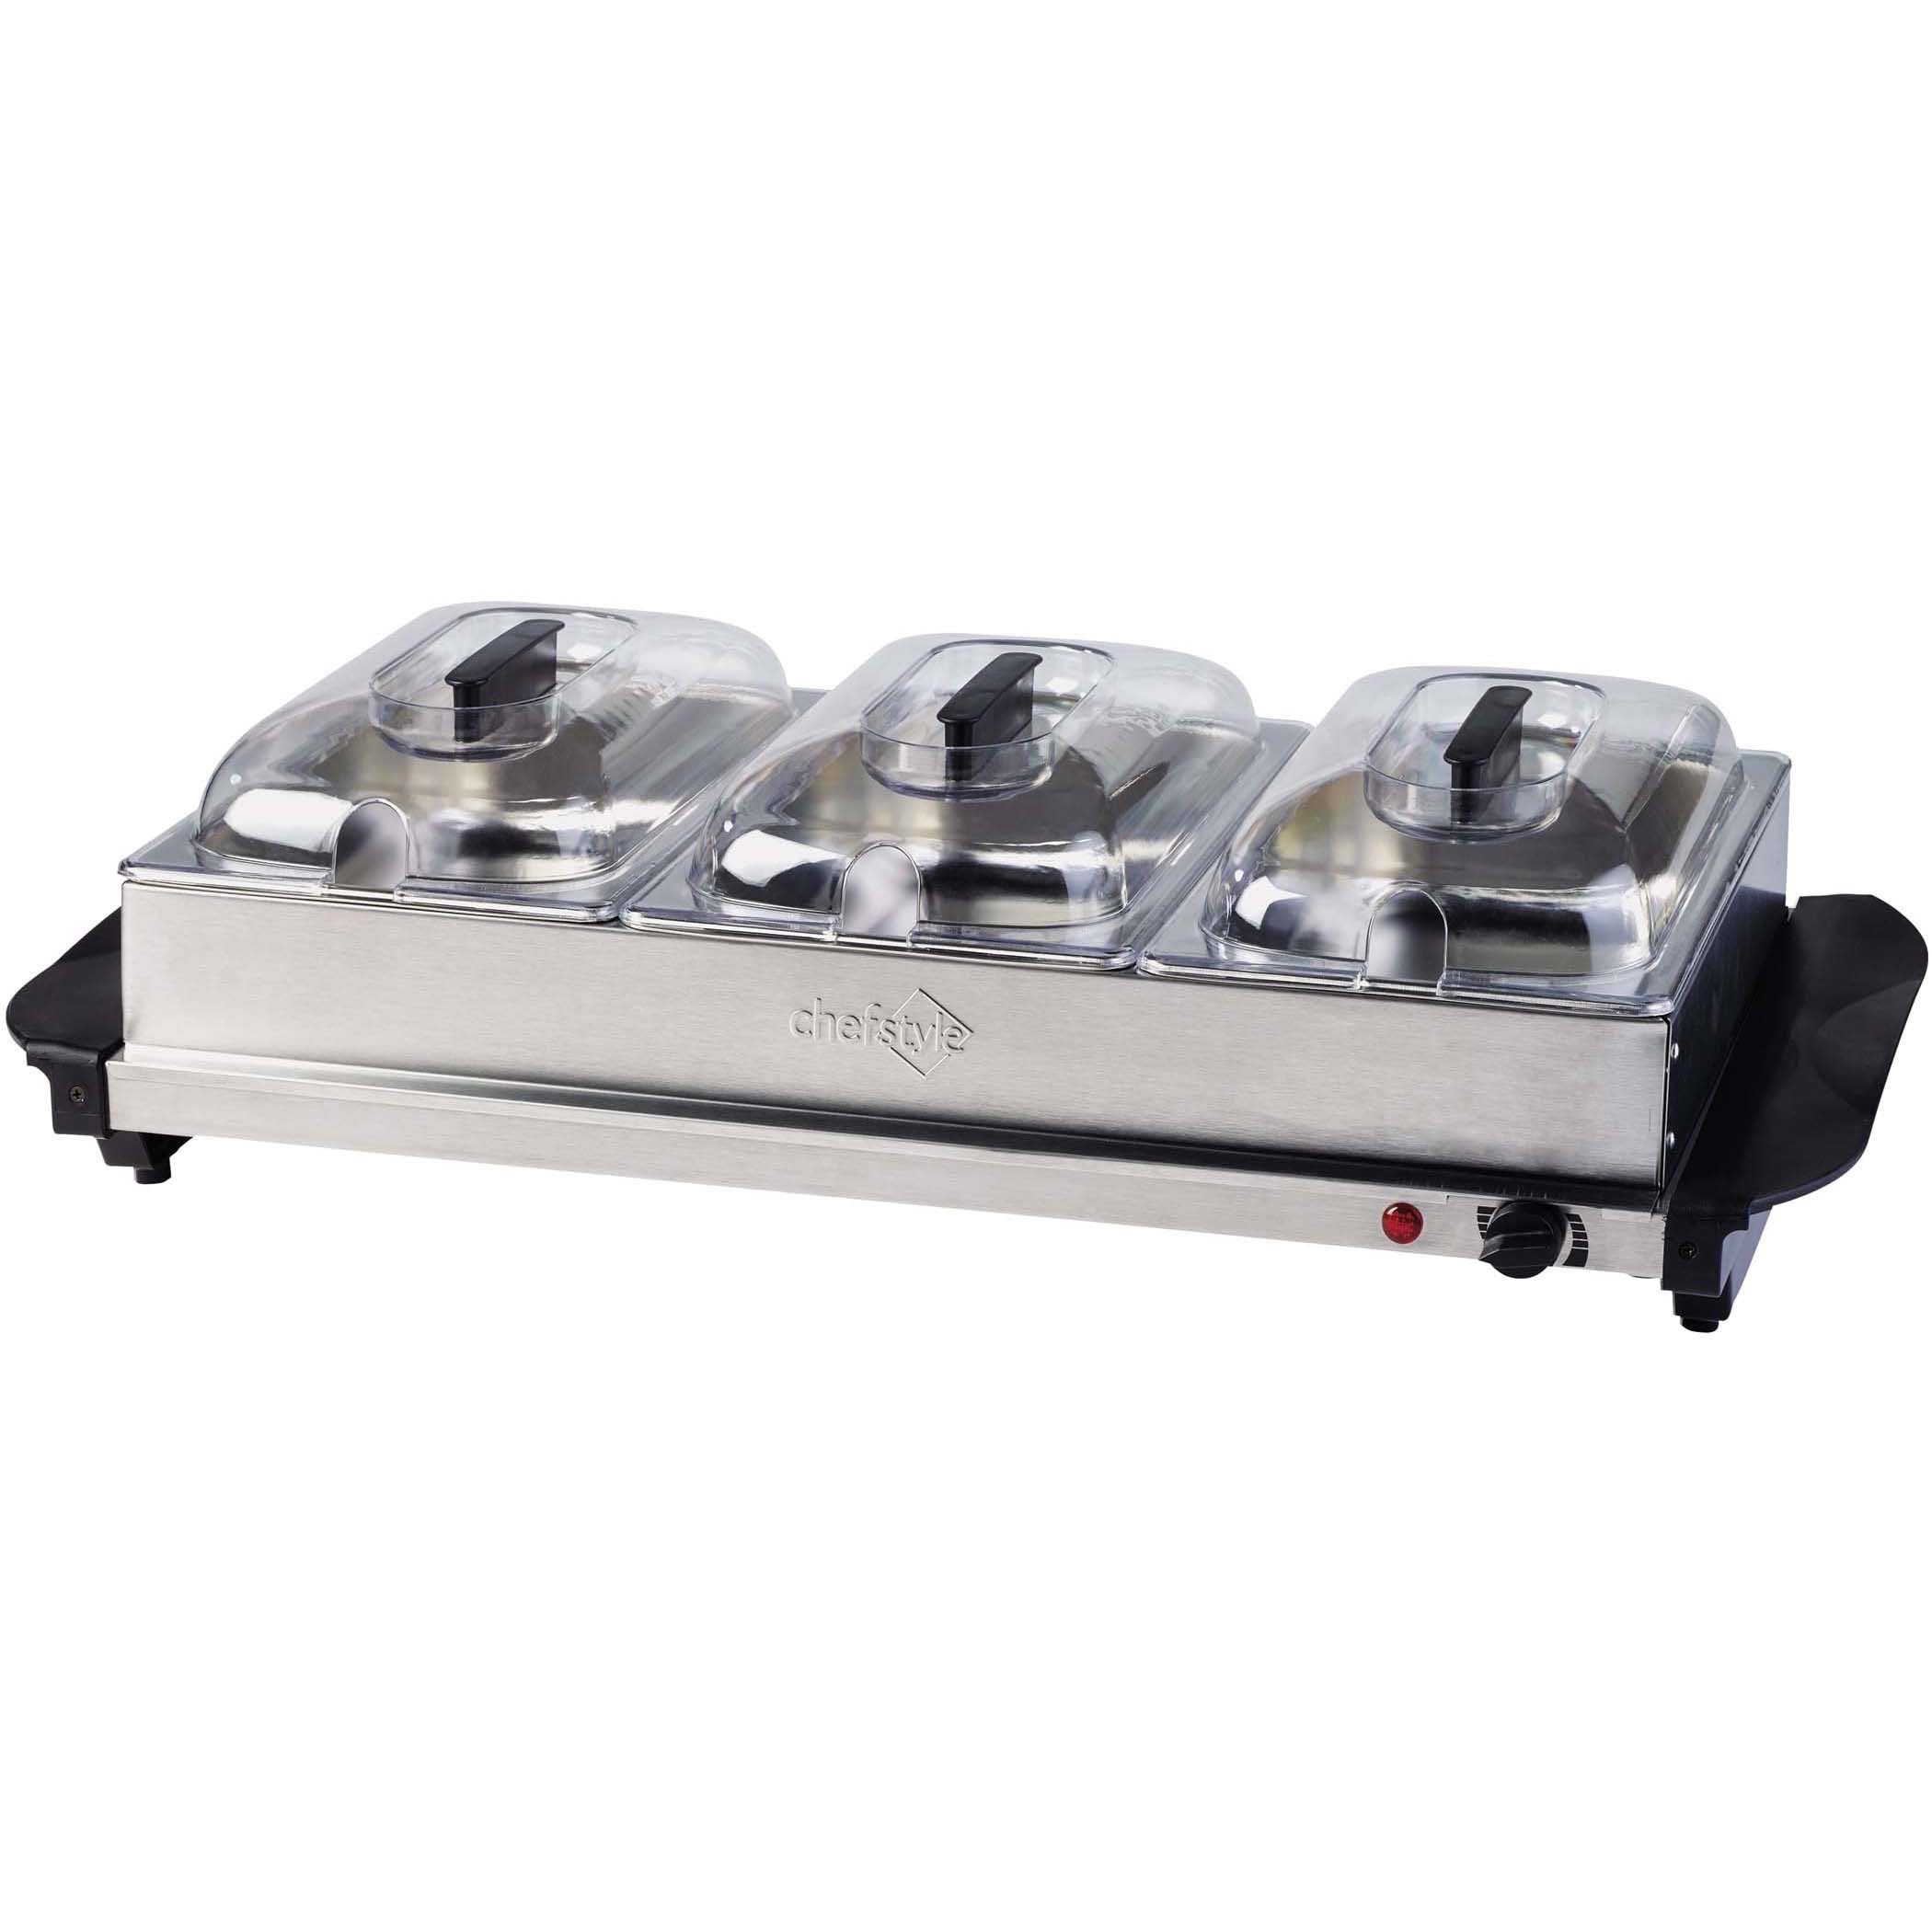 Chefman, Party Supplies, New Chefman 3 Section Buffet Server Warmer With  Serving Dishes Or Use Your Own